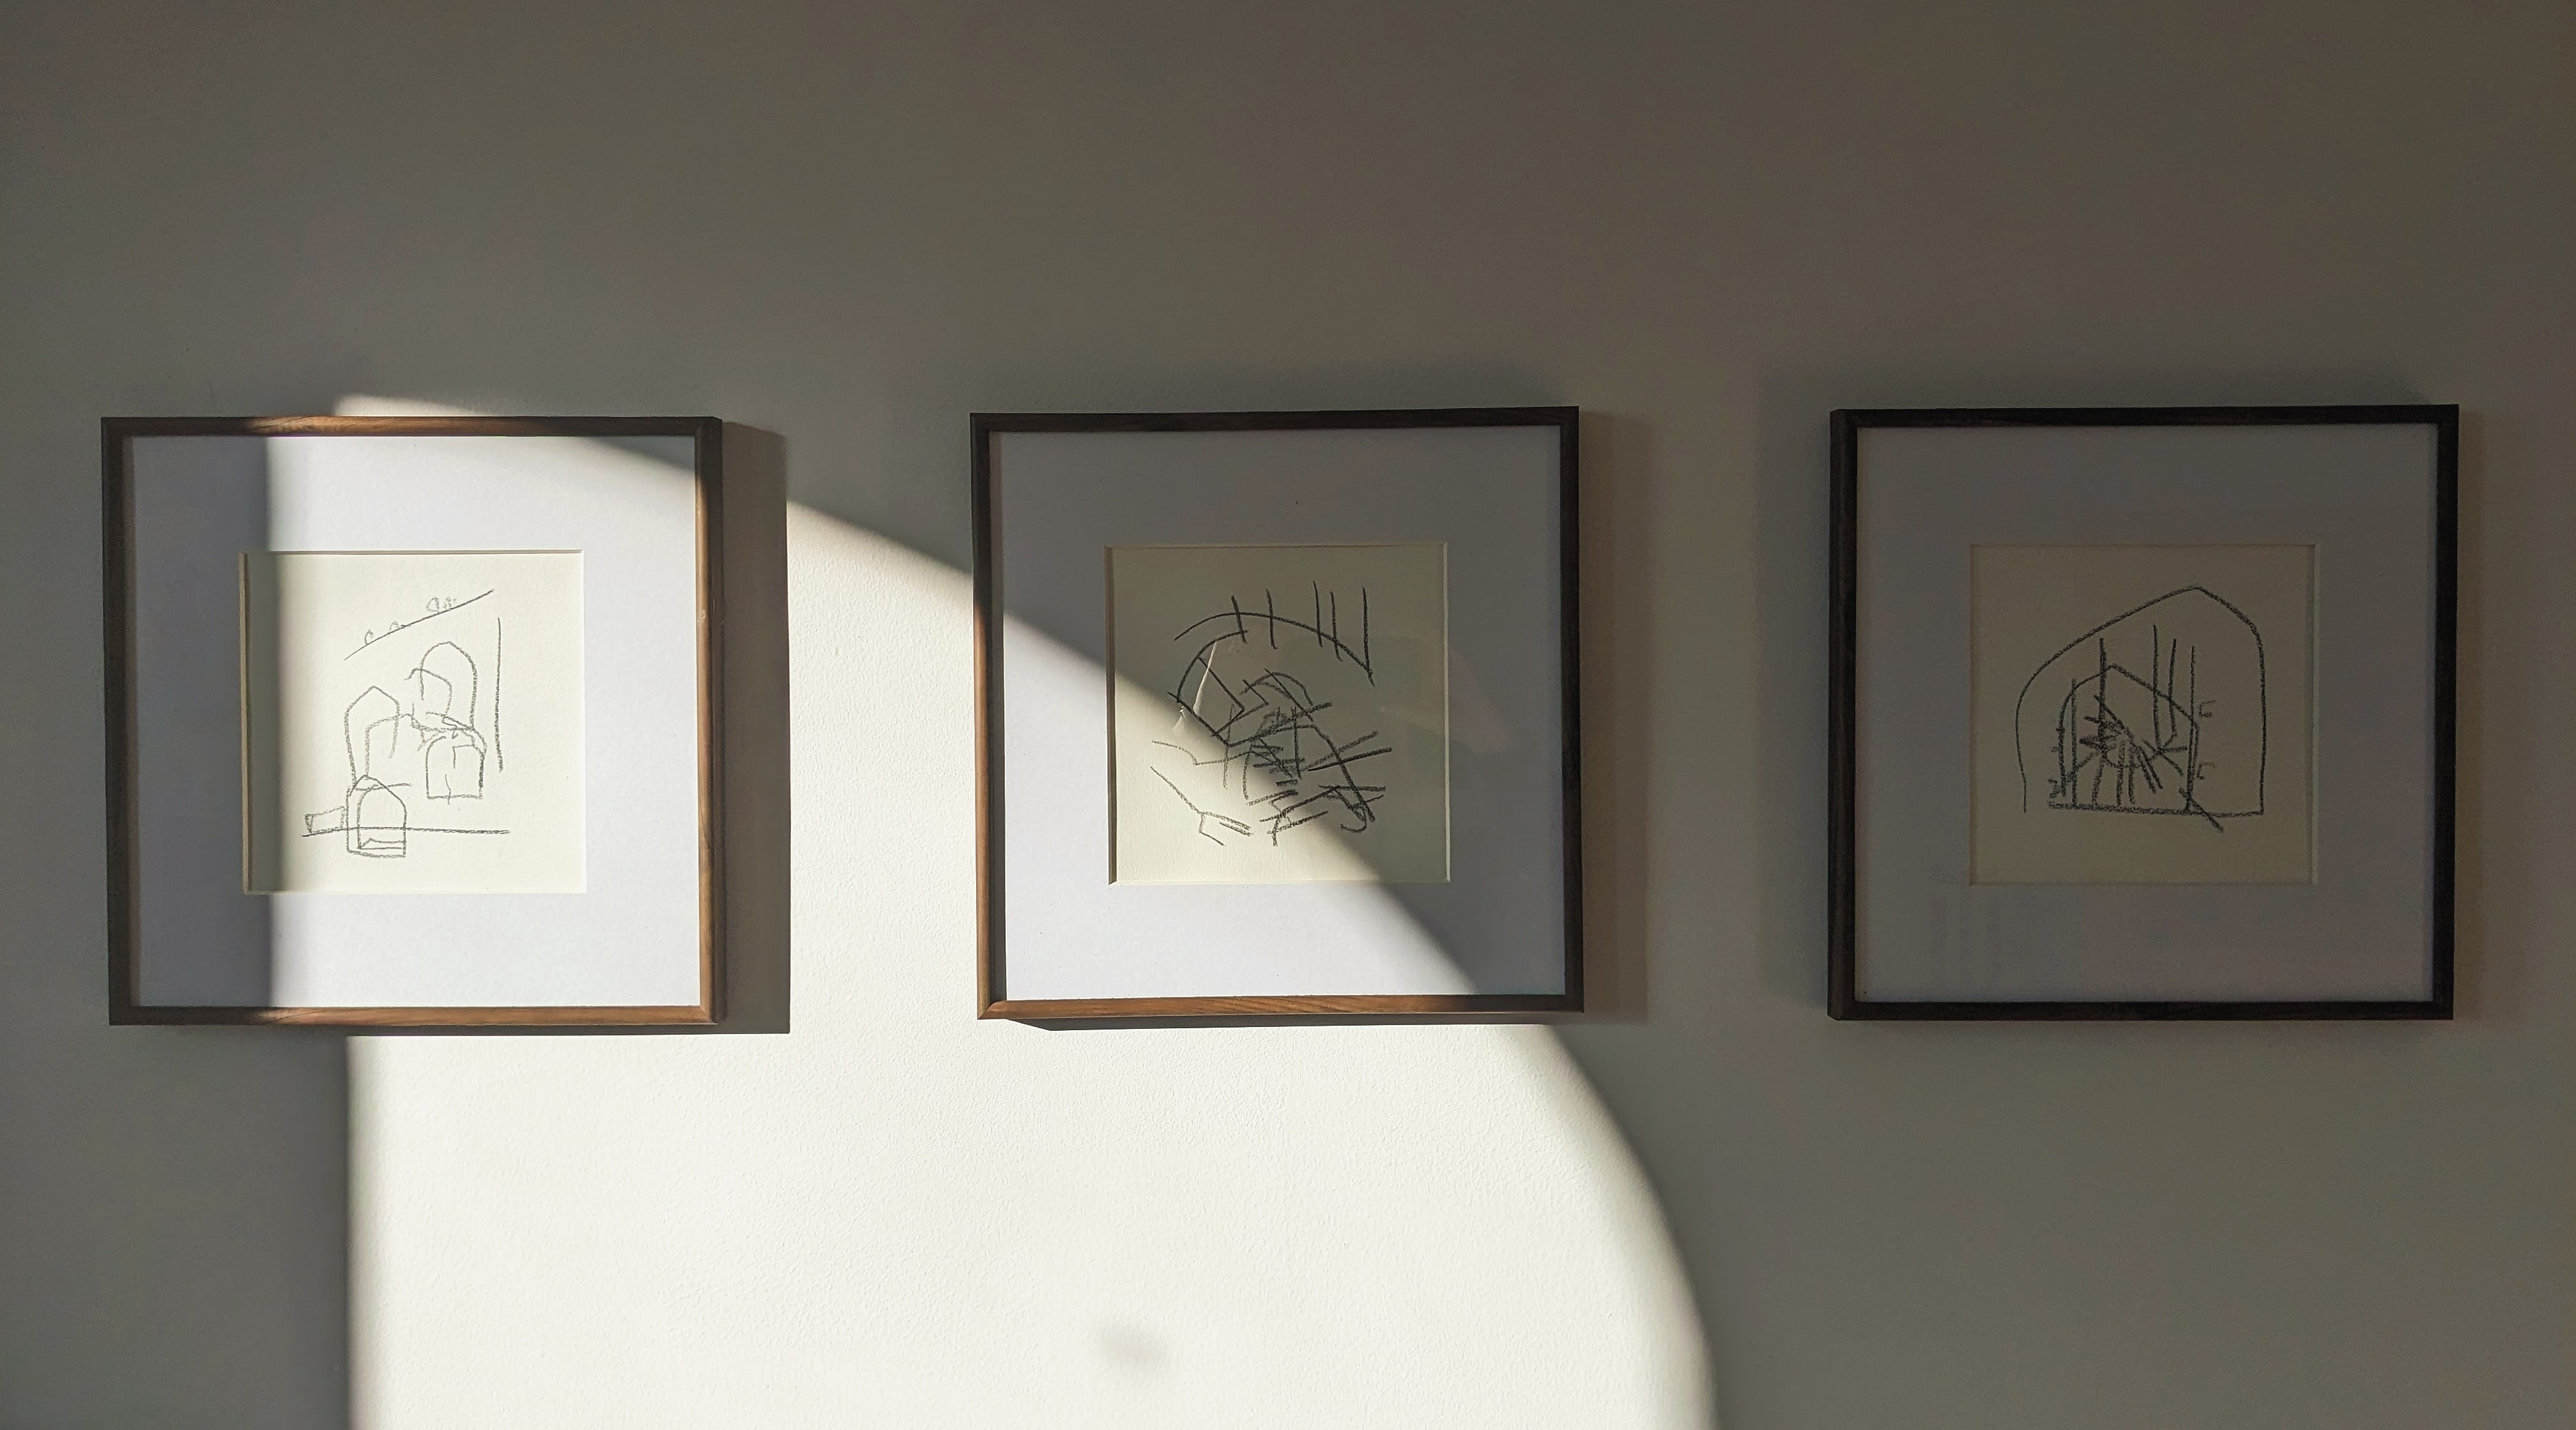 A photograph of three separate black and white abstract line drawings.